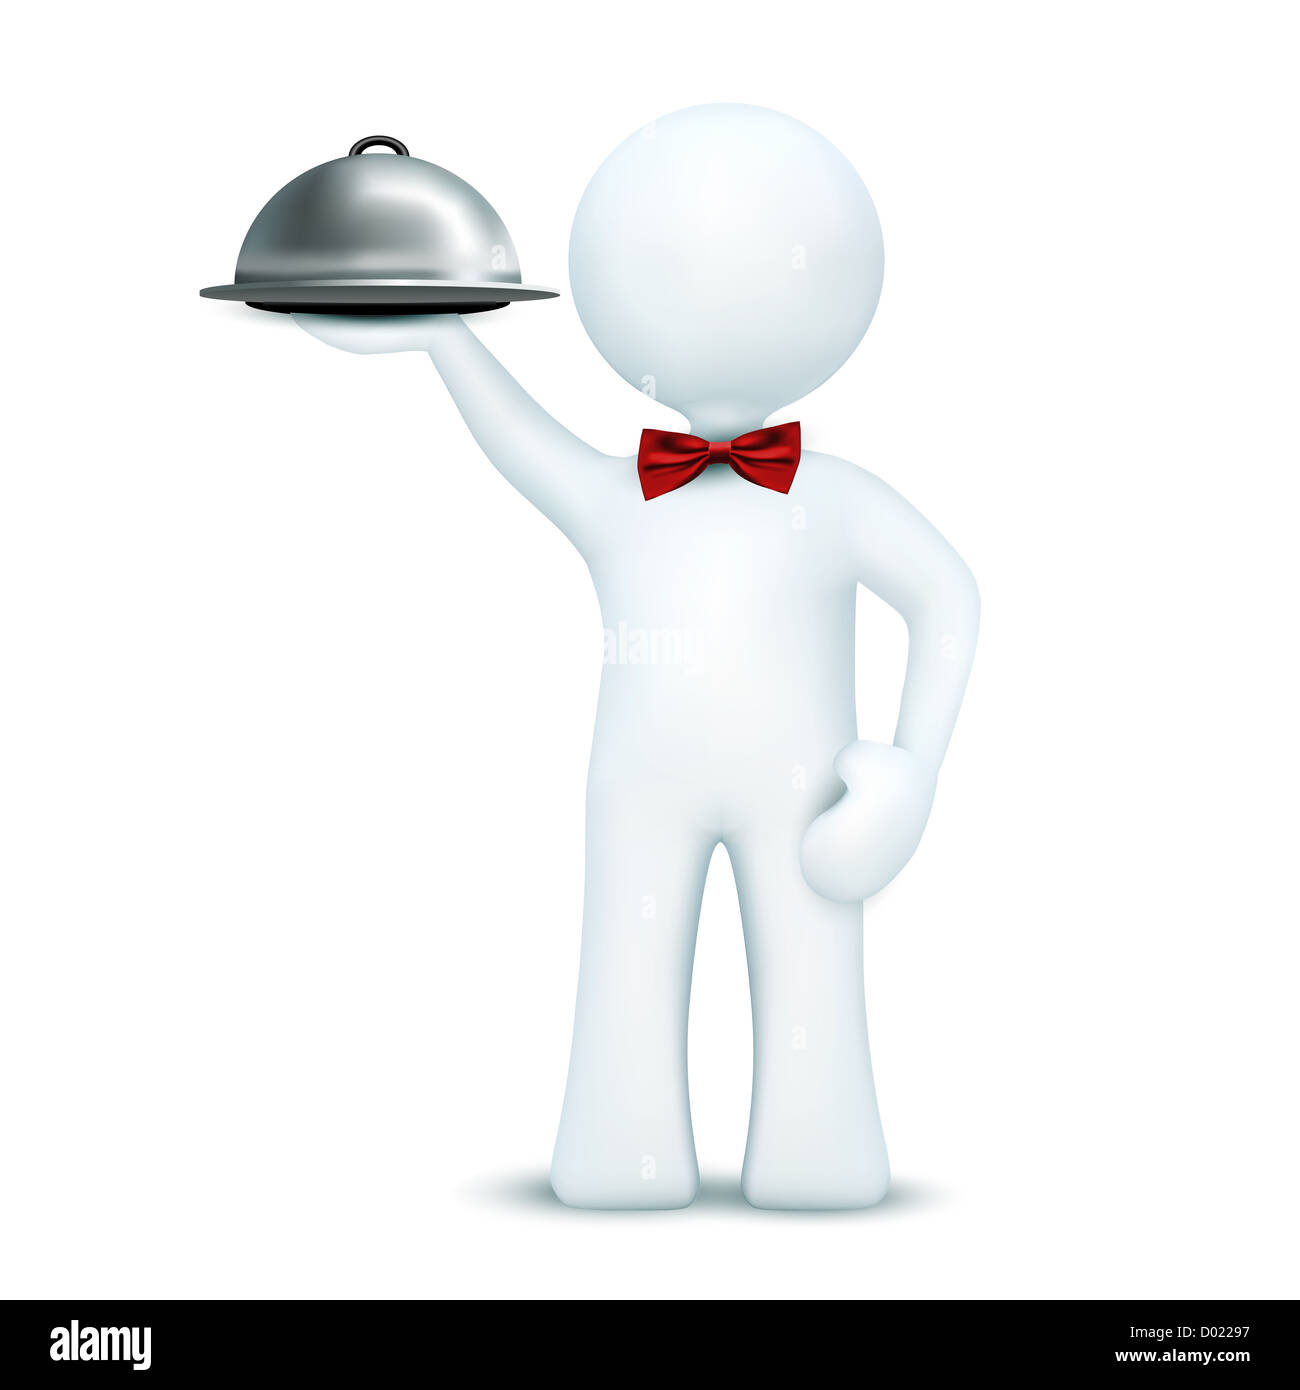 illustration of 3d character holding serving tray on an isolated white background Stock Photo